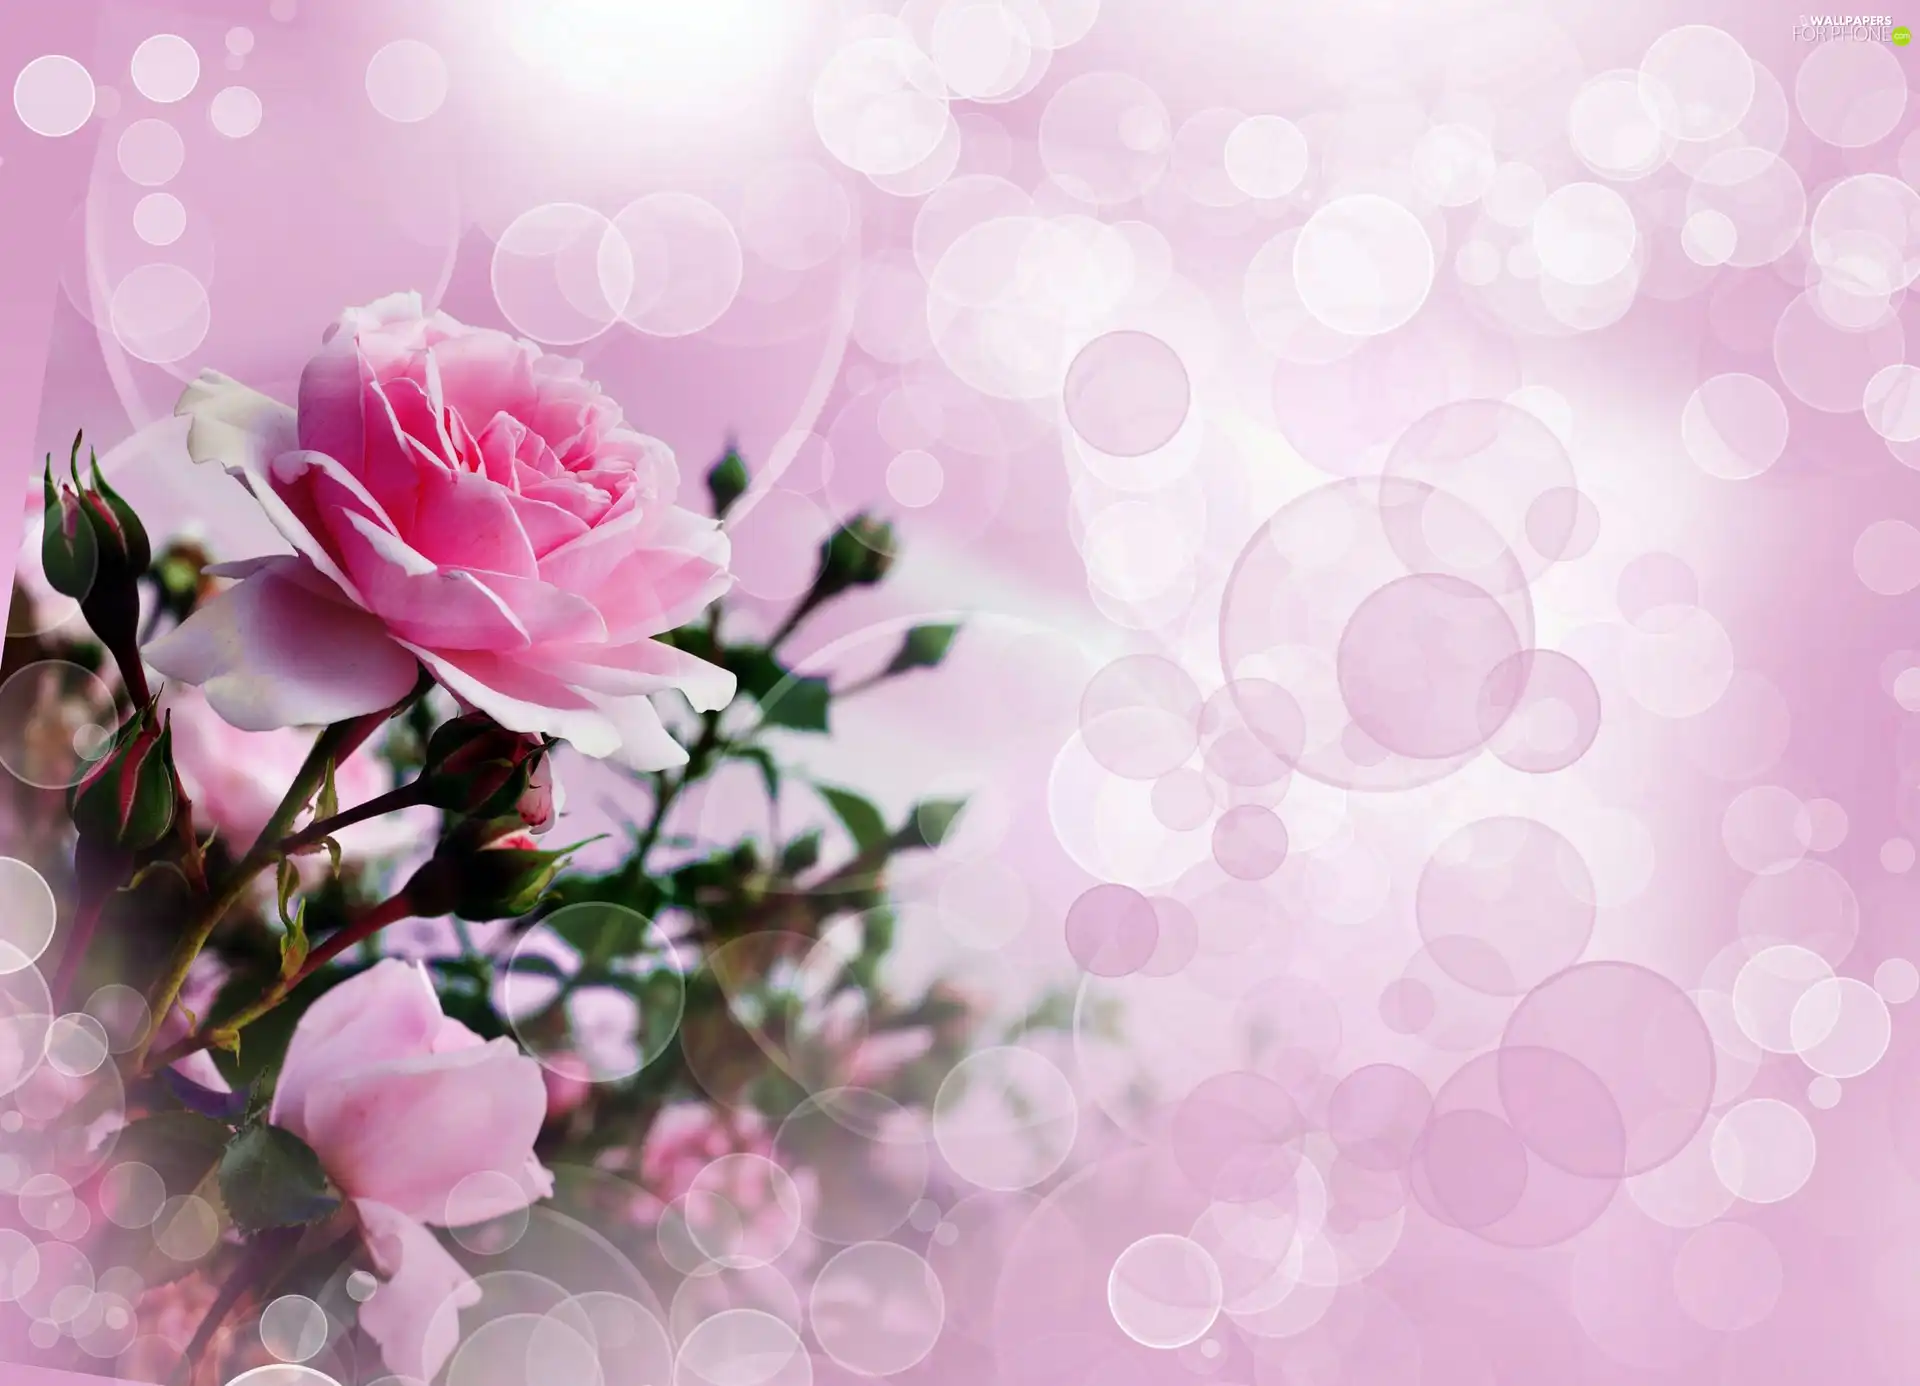 reflections, light, roses, bouquet, Pink